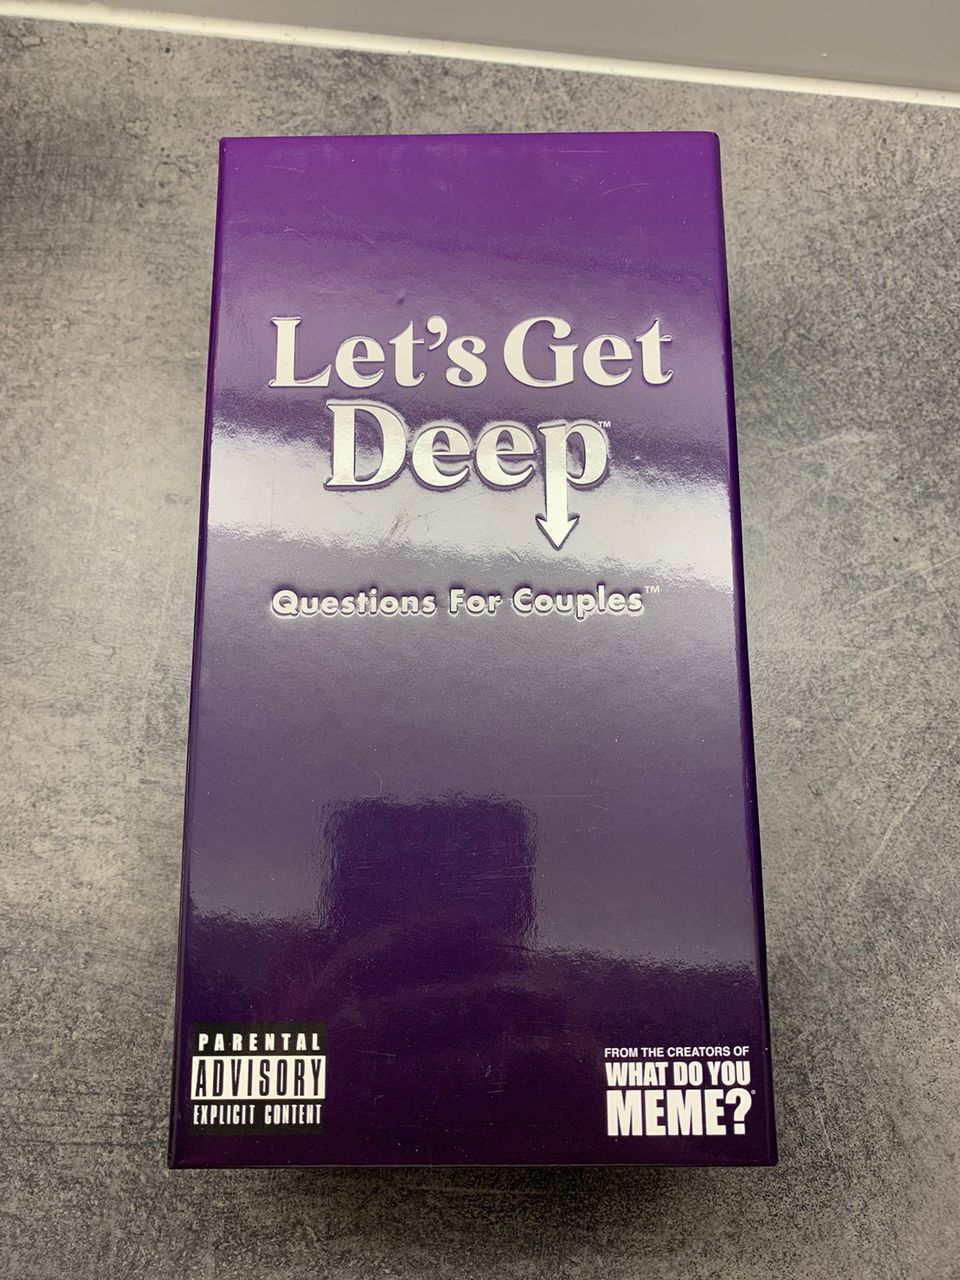 Let’s get deep game for couples